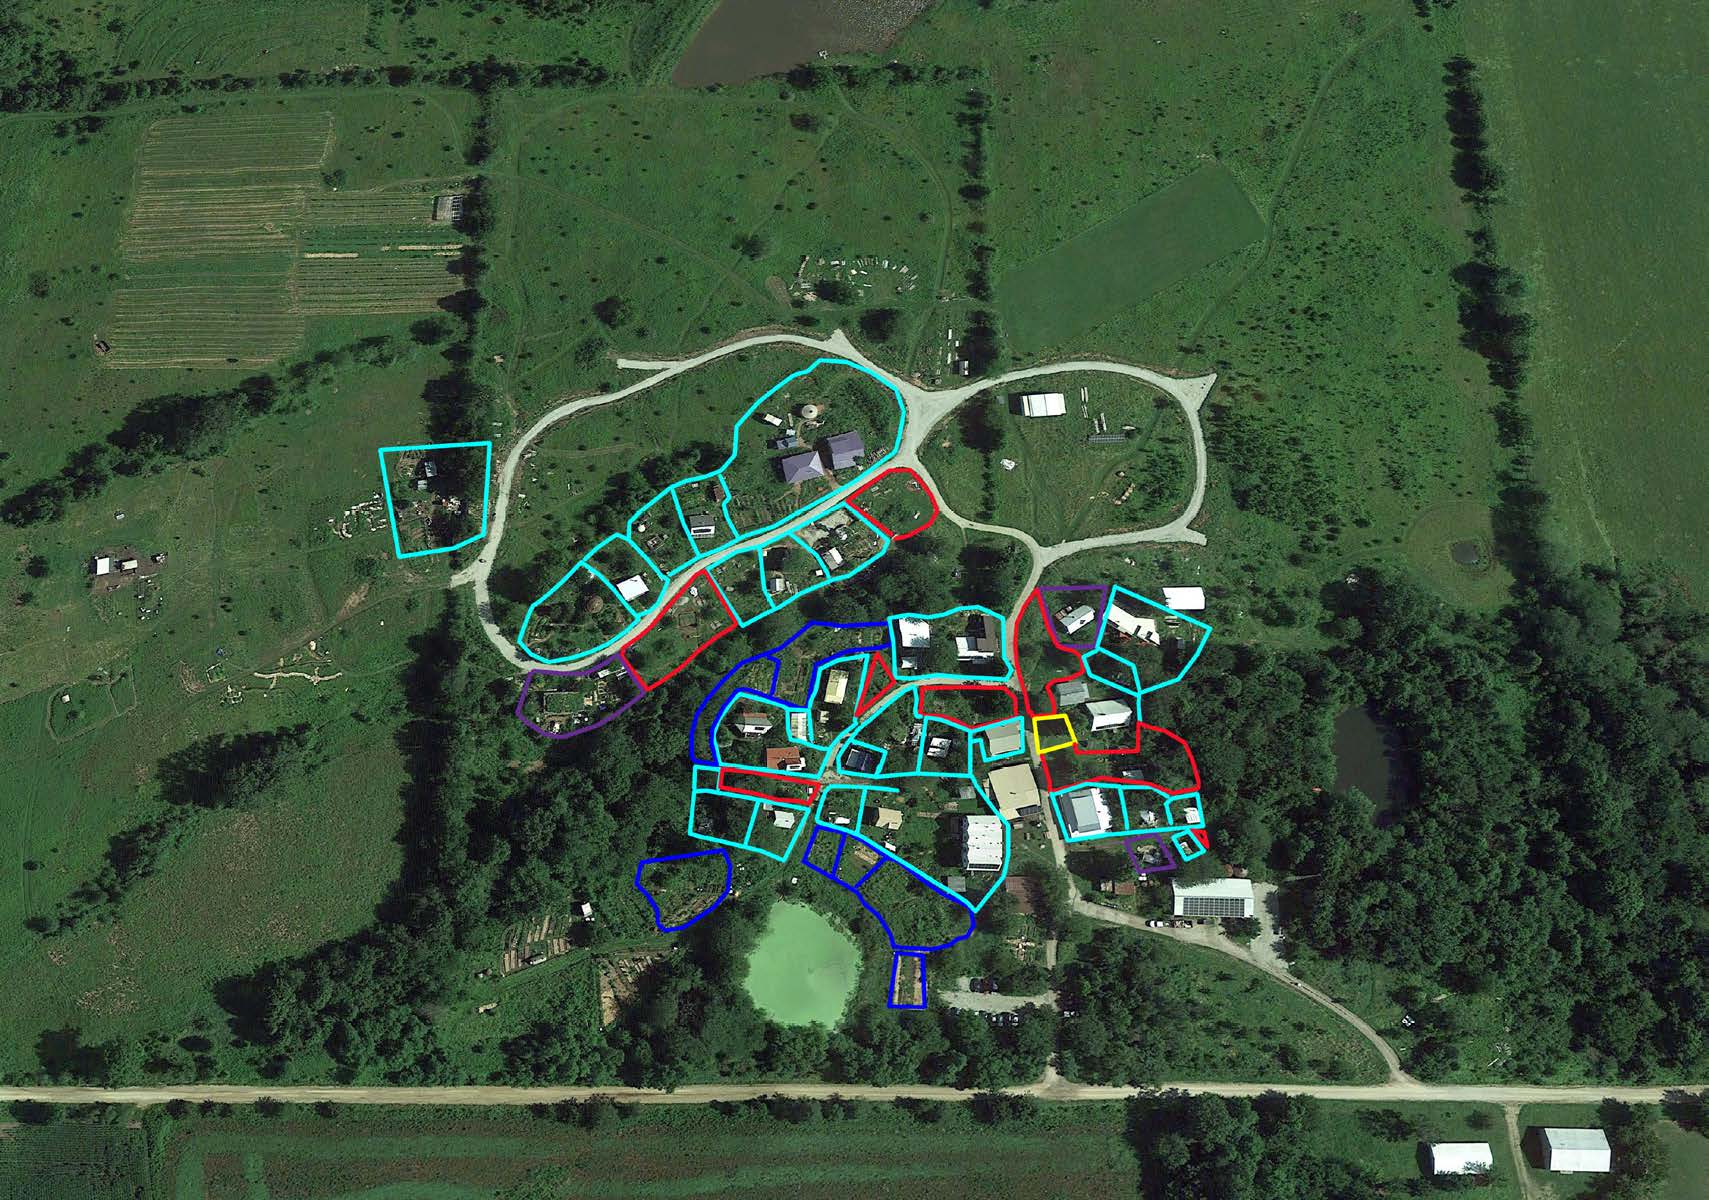 Figure 6: Satellite image from 2015 showing Dancing Rabbit’s current urban area. Currently occupied leaseholds are outlined in light blue and purple. Available residential leaseholds are outlined in red. Residential garden leaseholds are outlined in dark blue. Image by Emily Beahm with Google Earth imagery and based on an original version by Dancing Rabbit Ecovillage